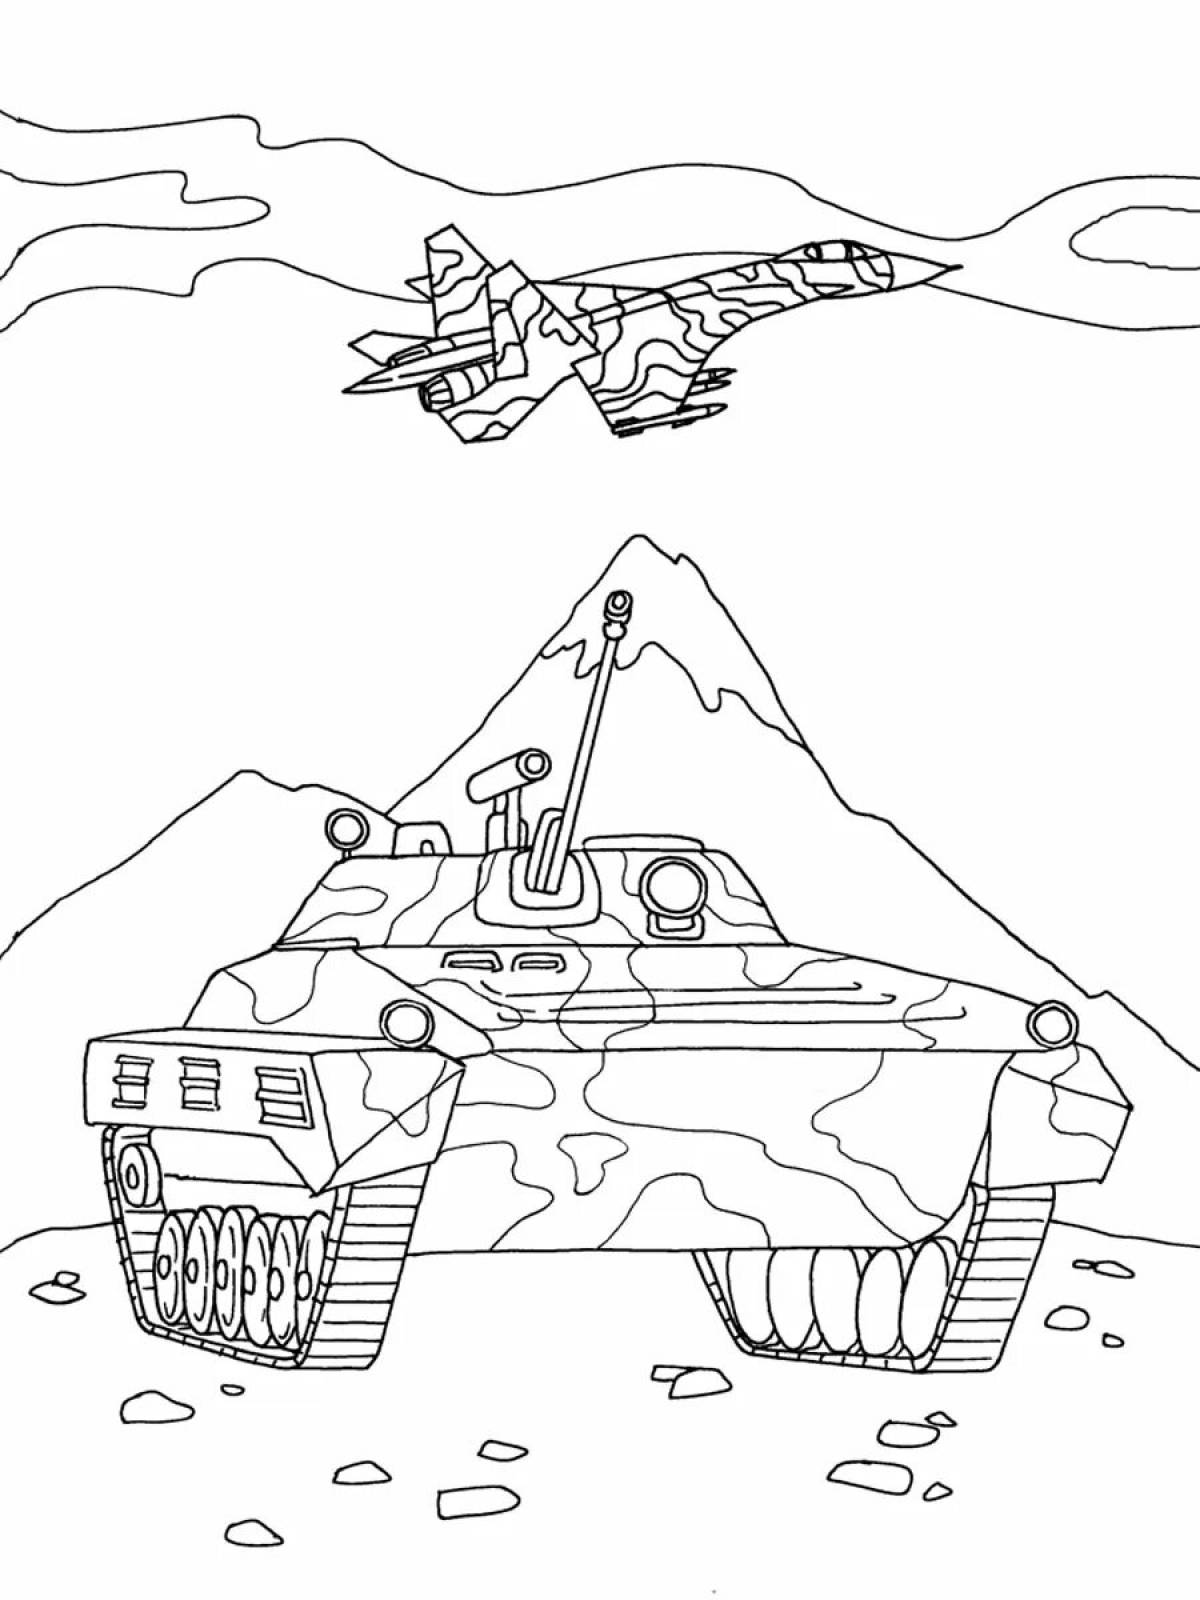 Brilliant afghanistan coloring book